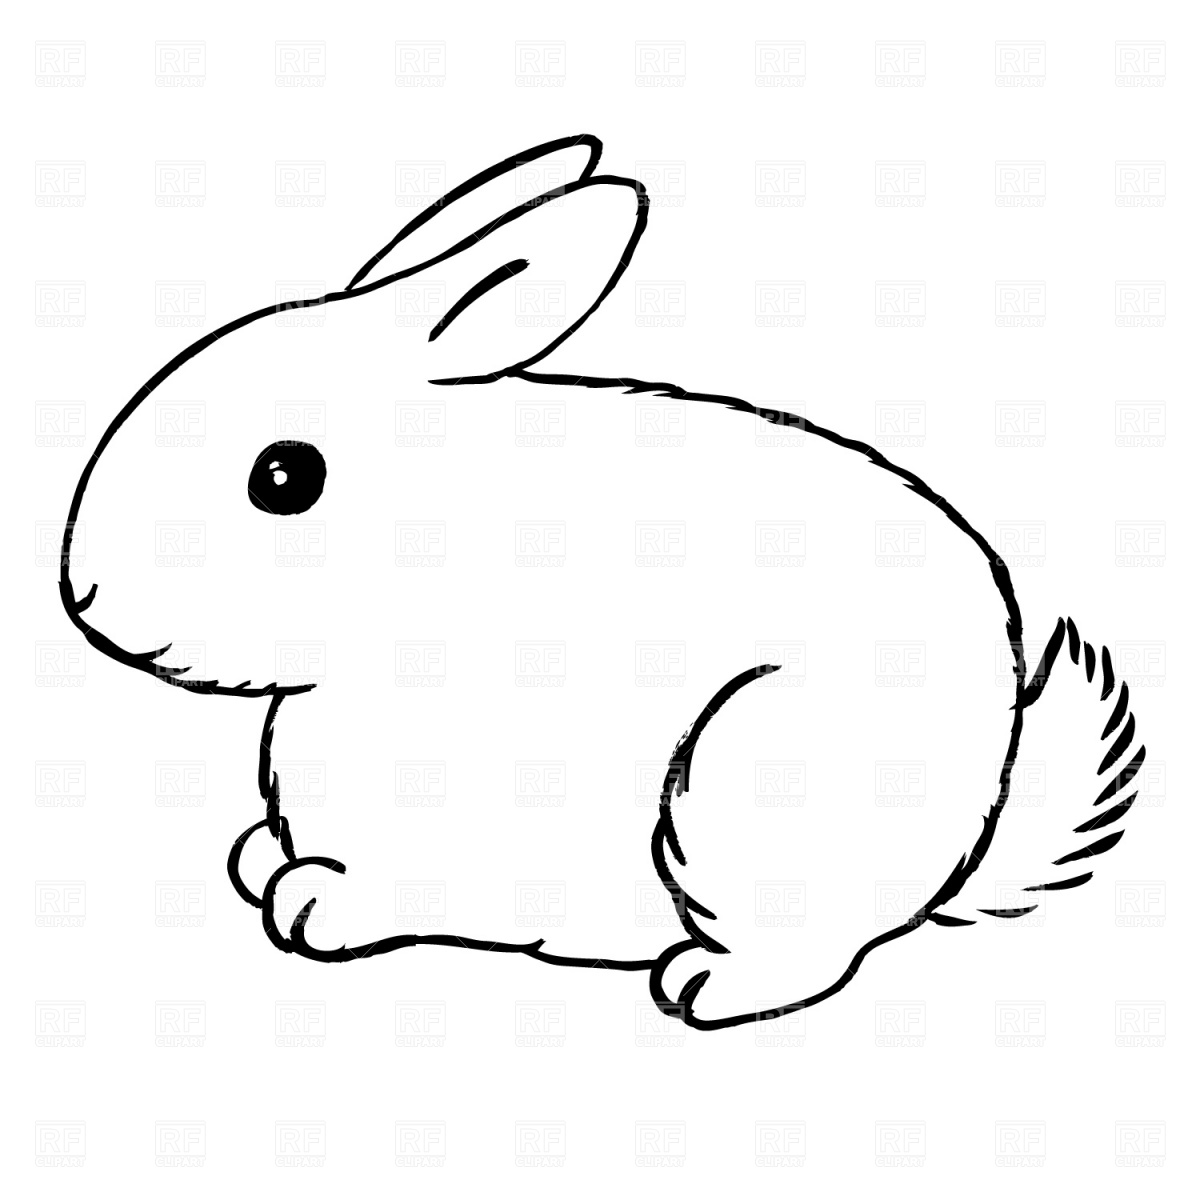 Bunny clipart black and white free clipart images 2